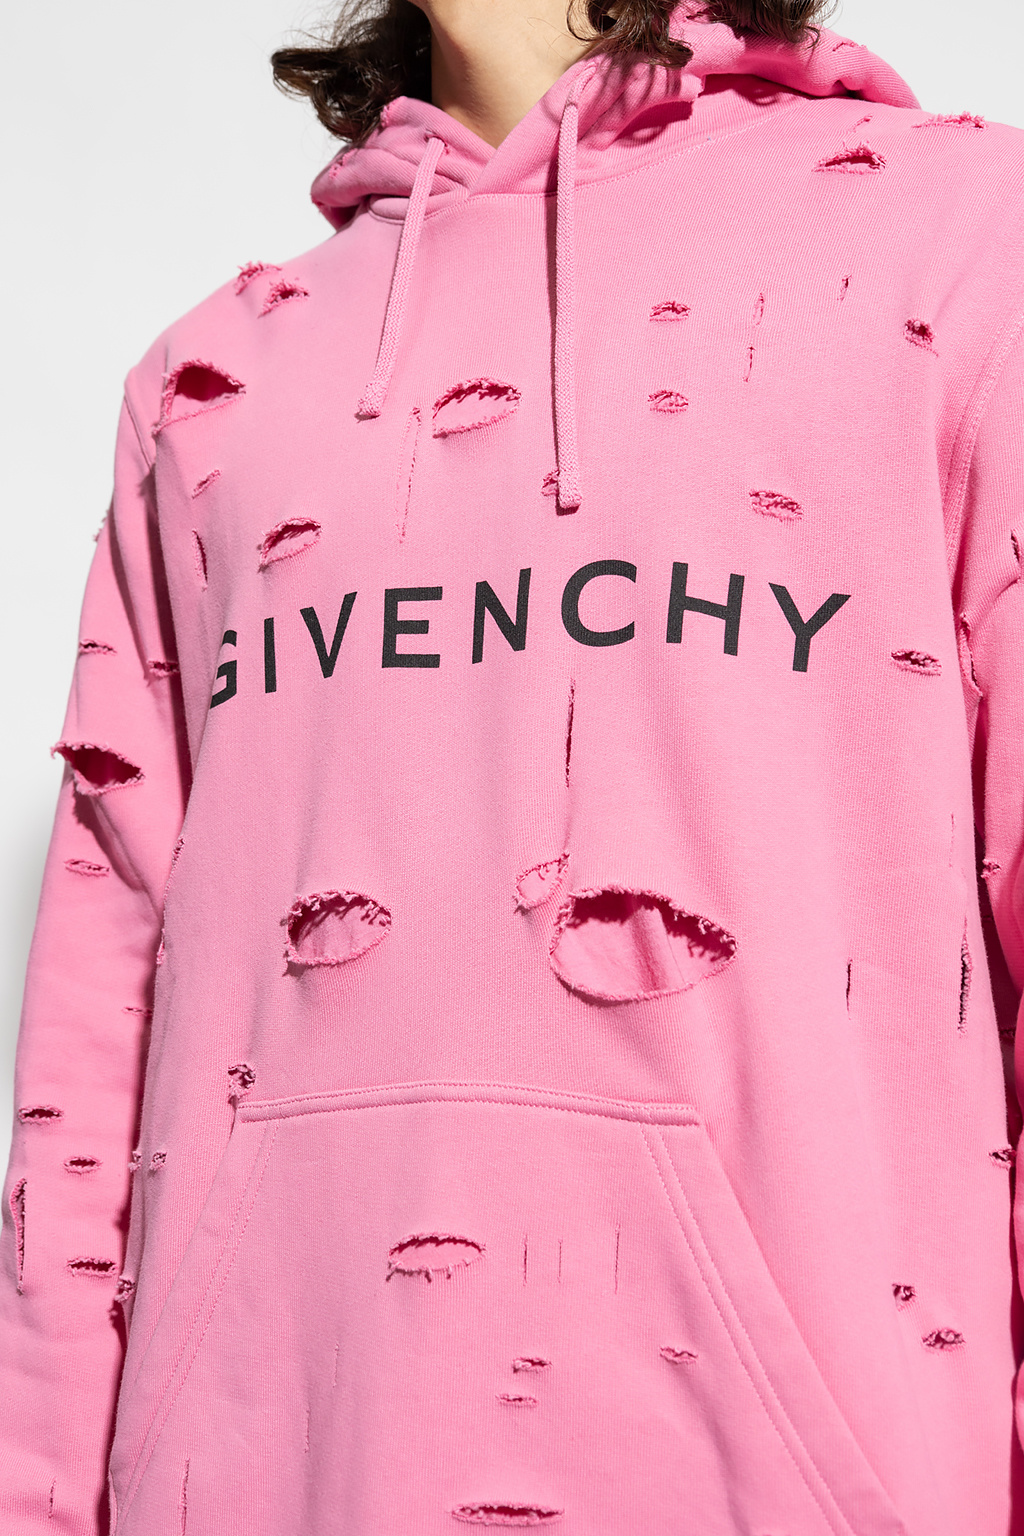 givenchy teint Hoodie with logo